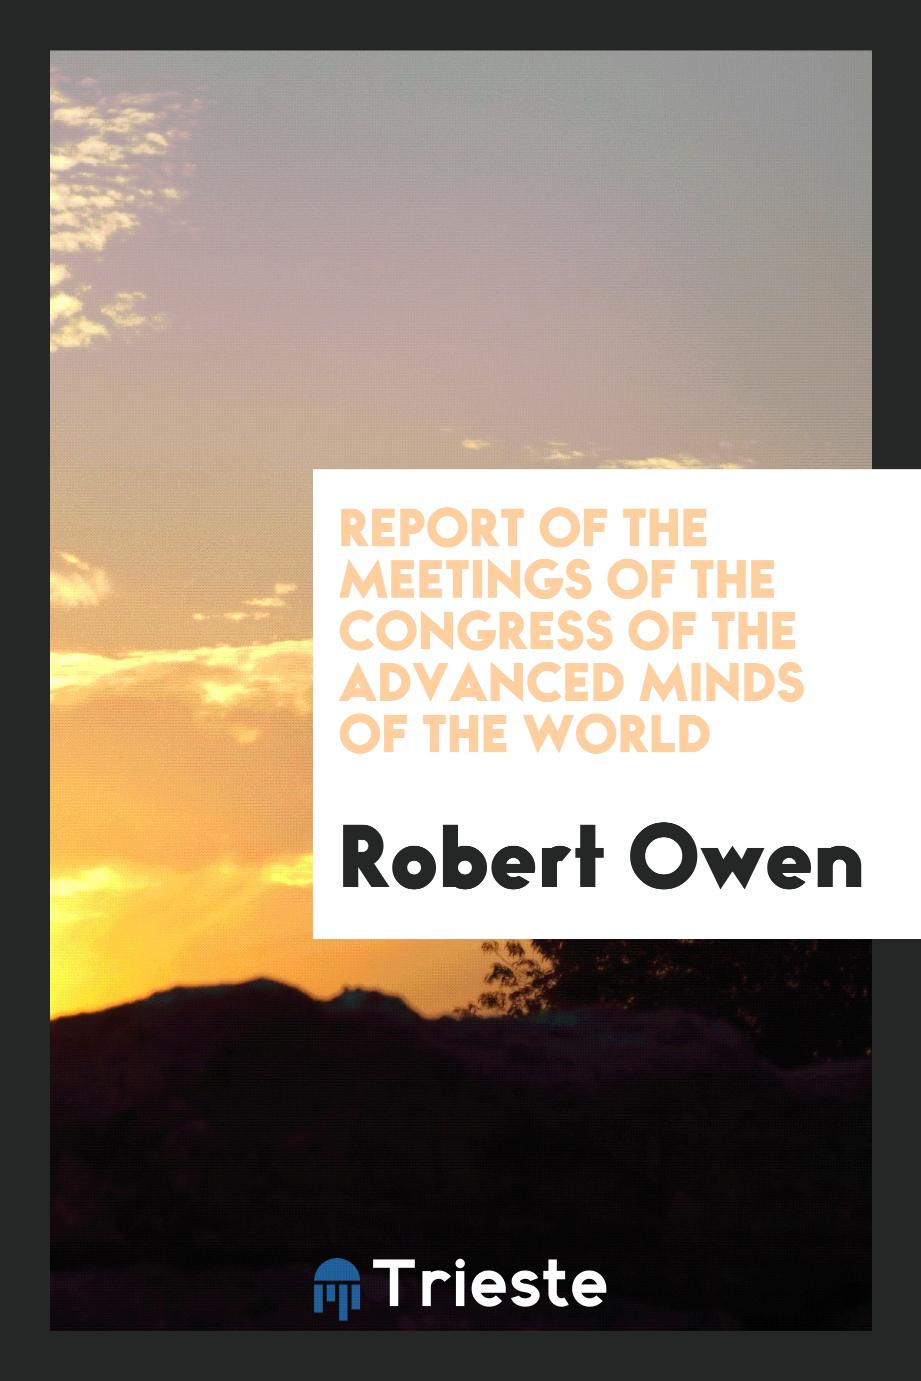 Report of the Meetings of the Congress of the Advanced Minds of the World